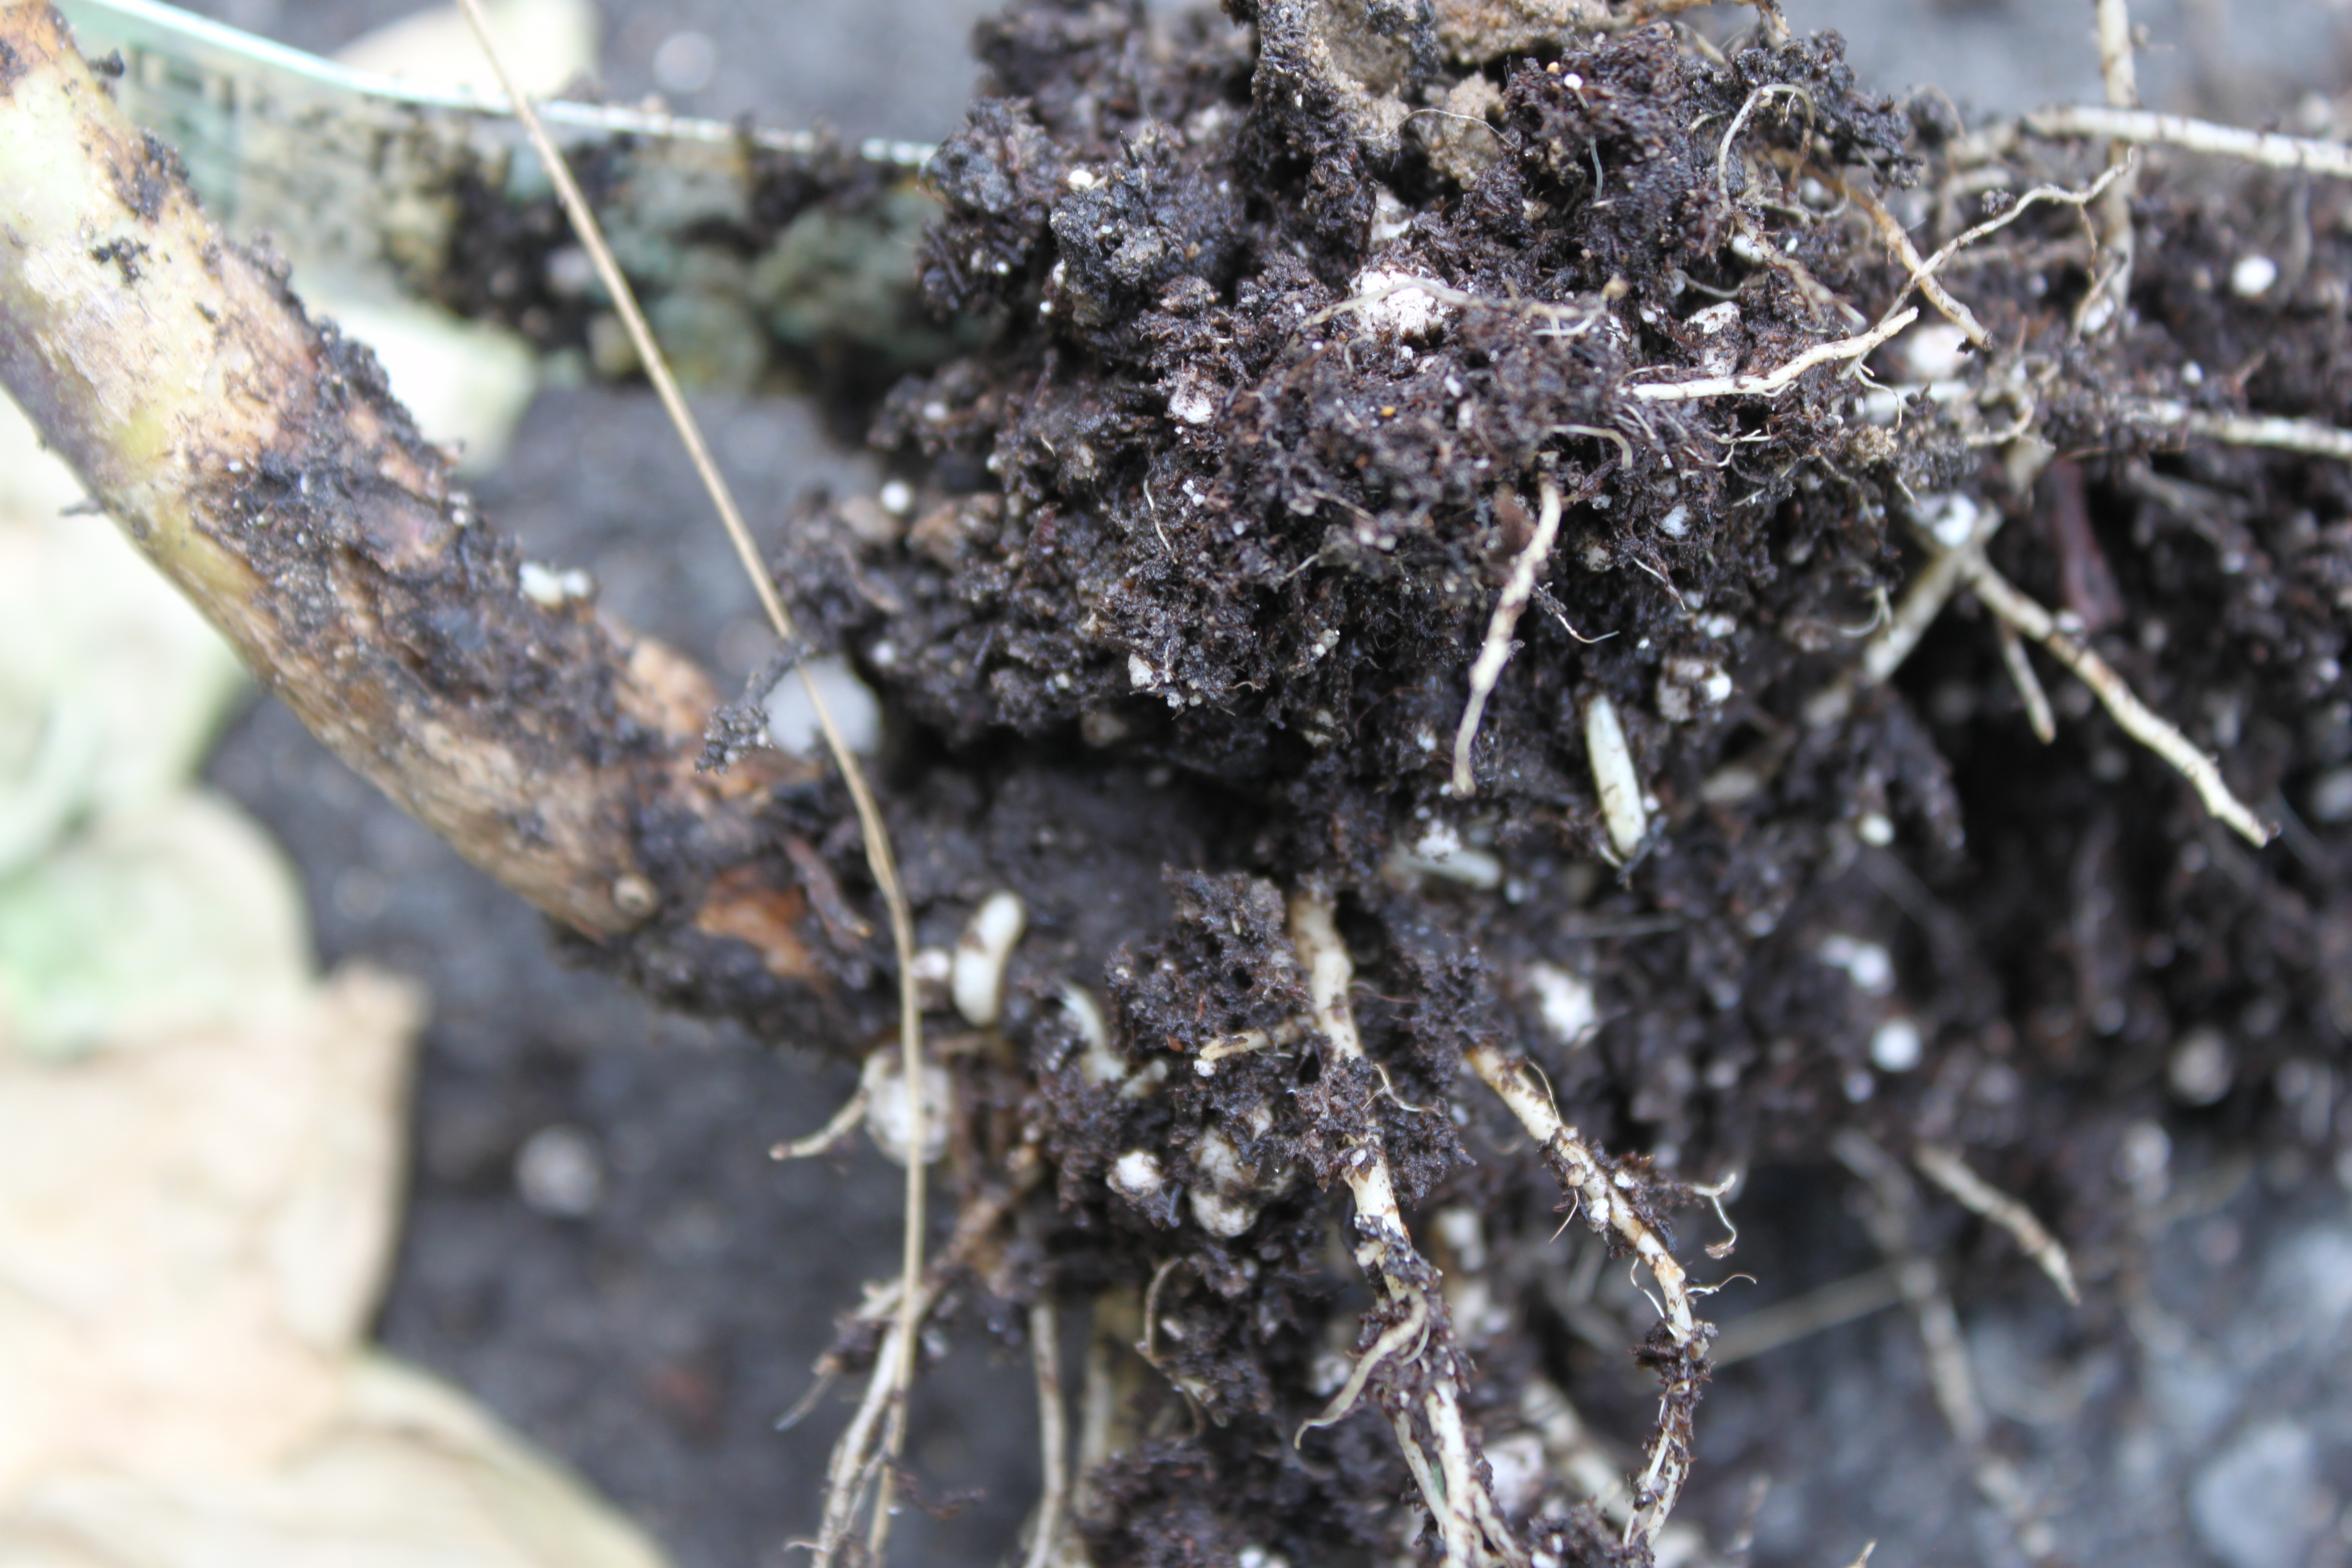 Cabbage Root Maggots on Collards